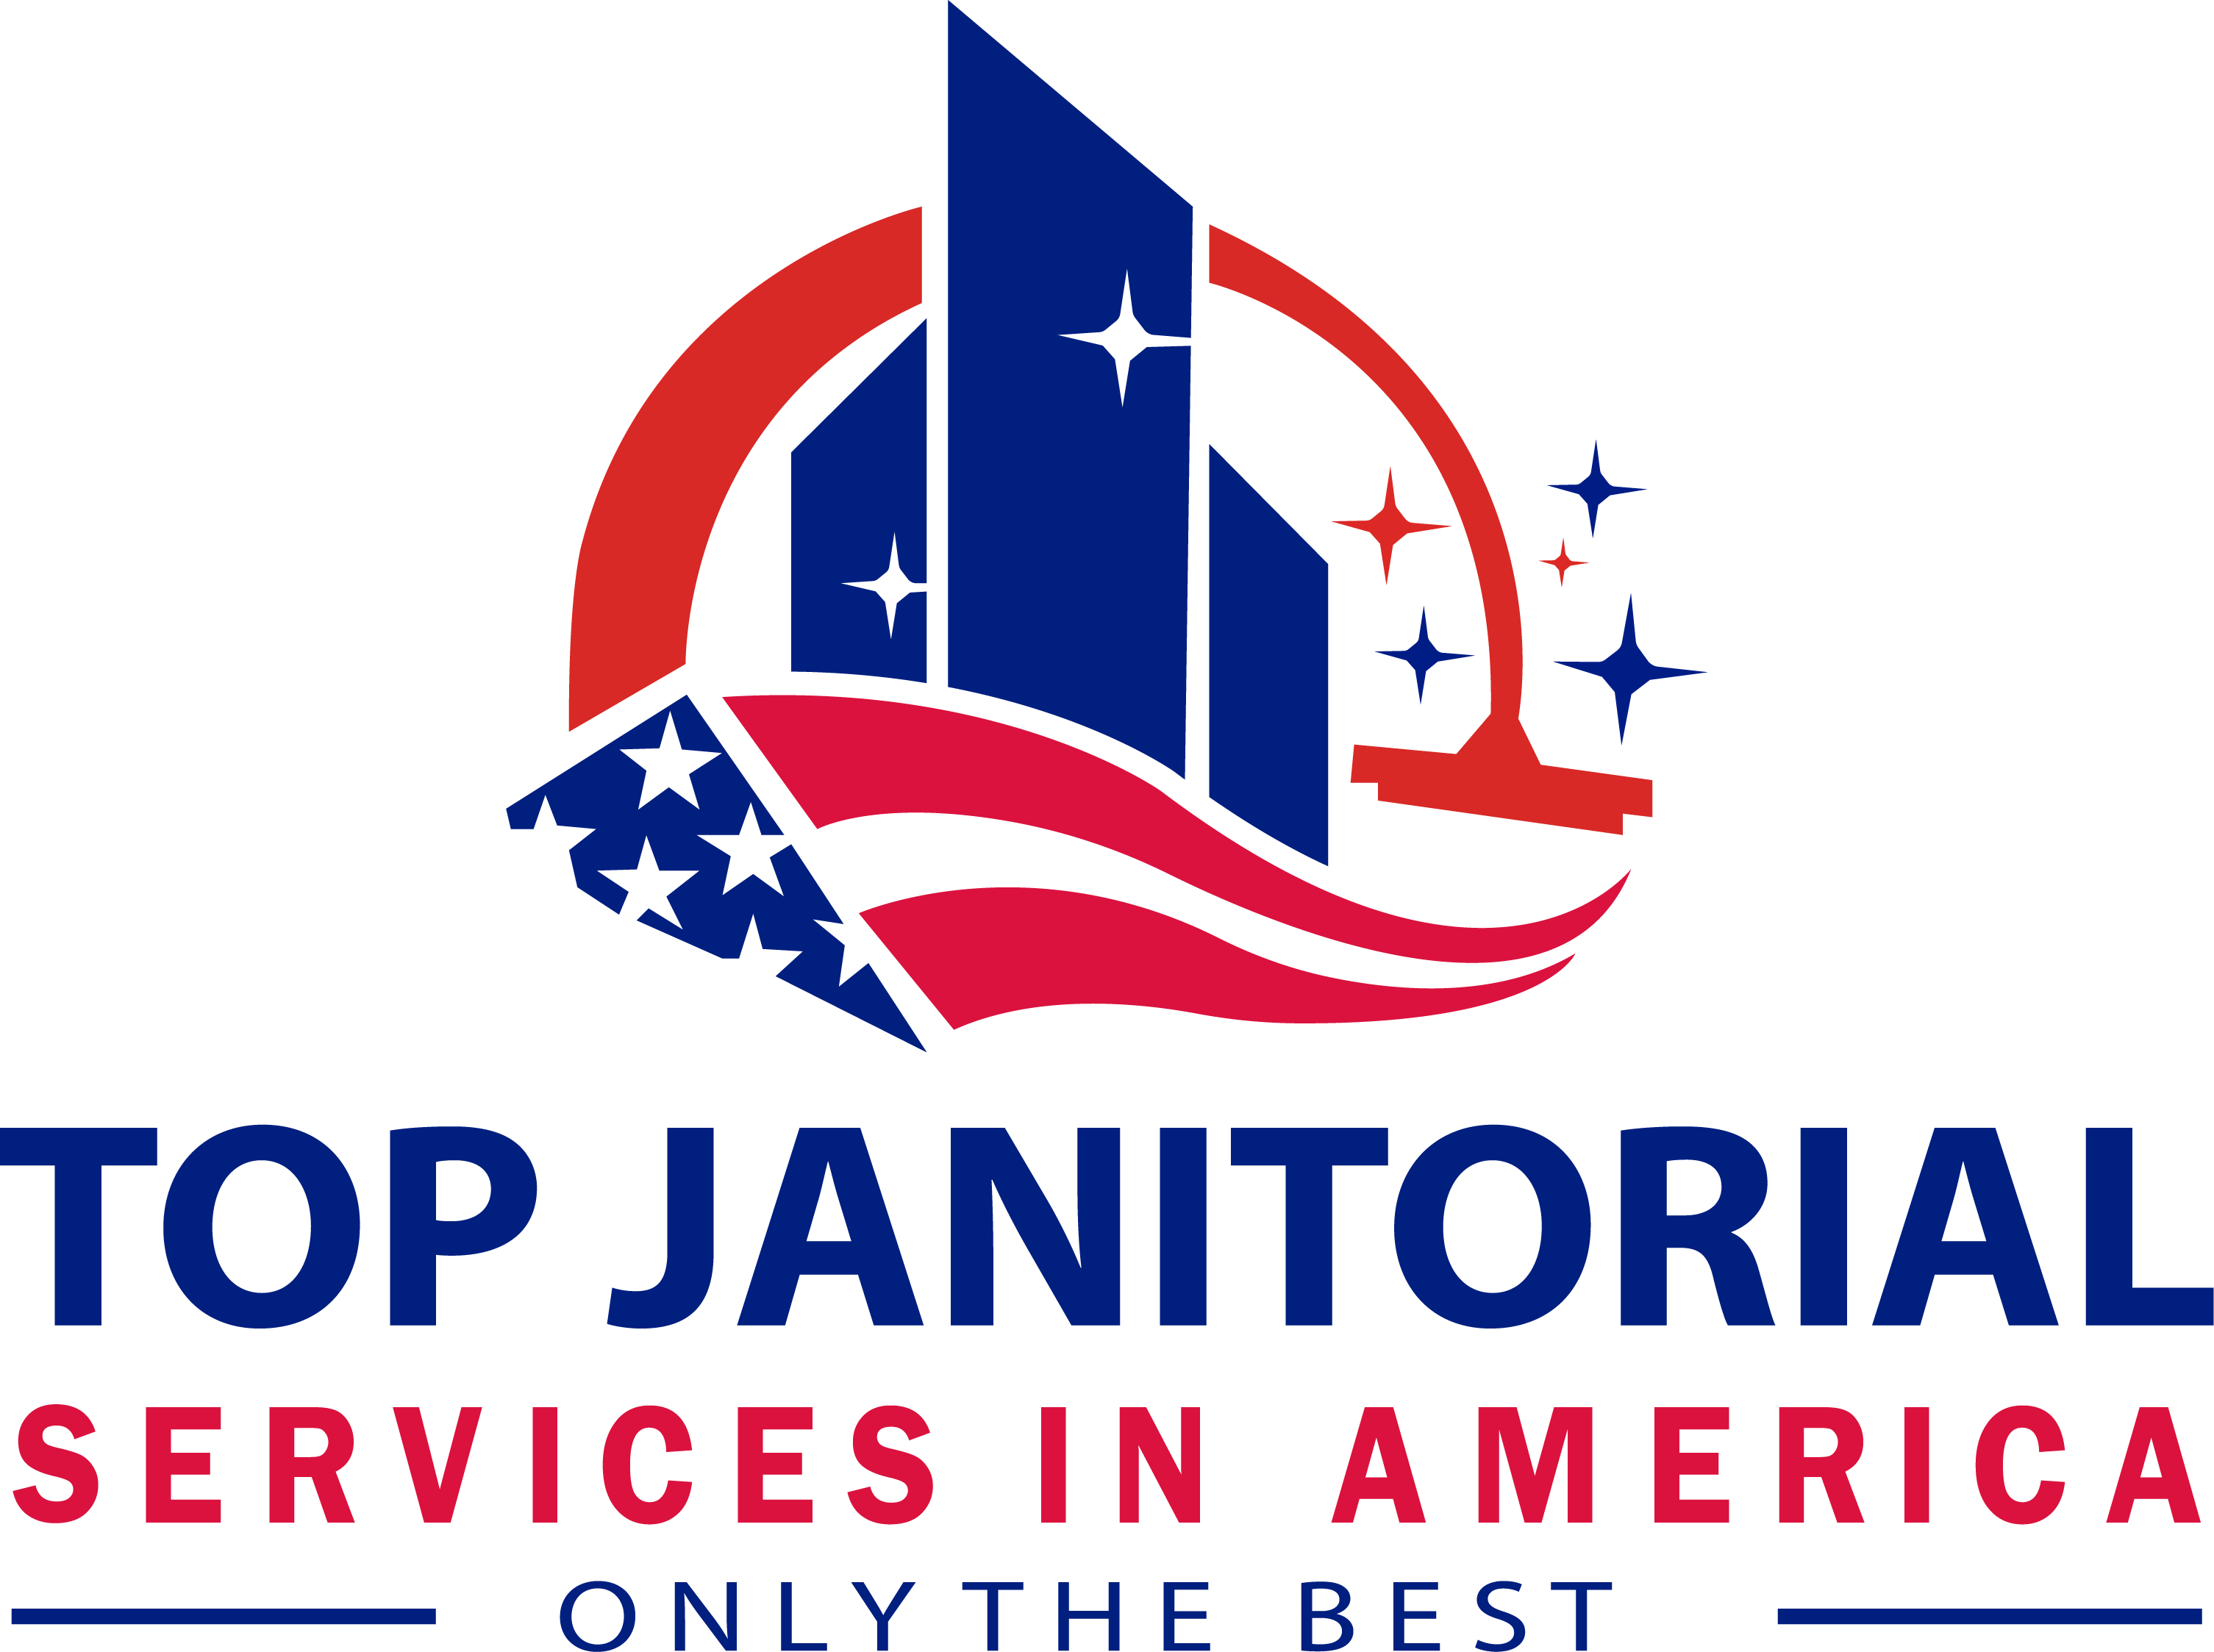 Top Janitorial Services